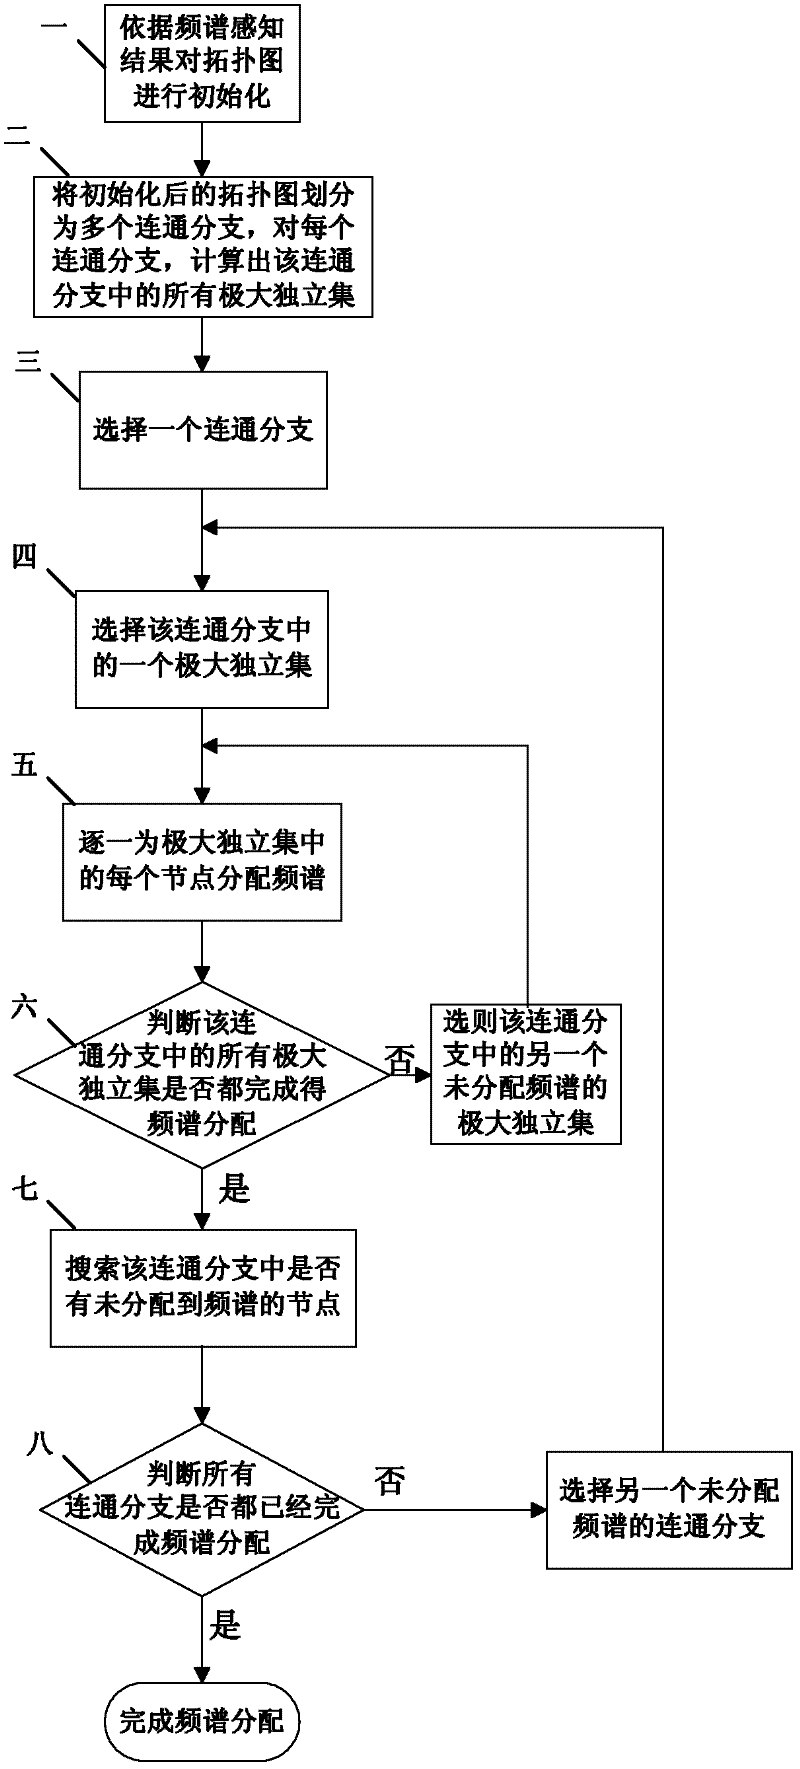 Frequency spectrum distribution method based on system revenue in cognitive radio